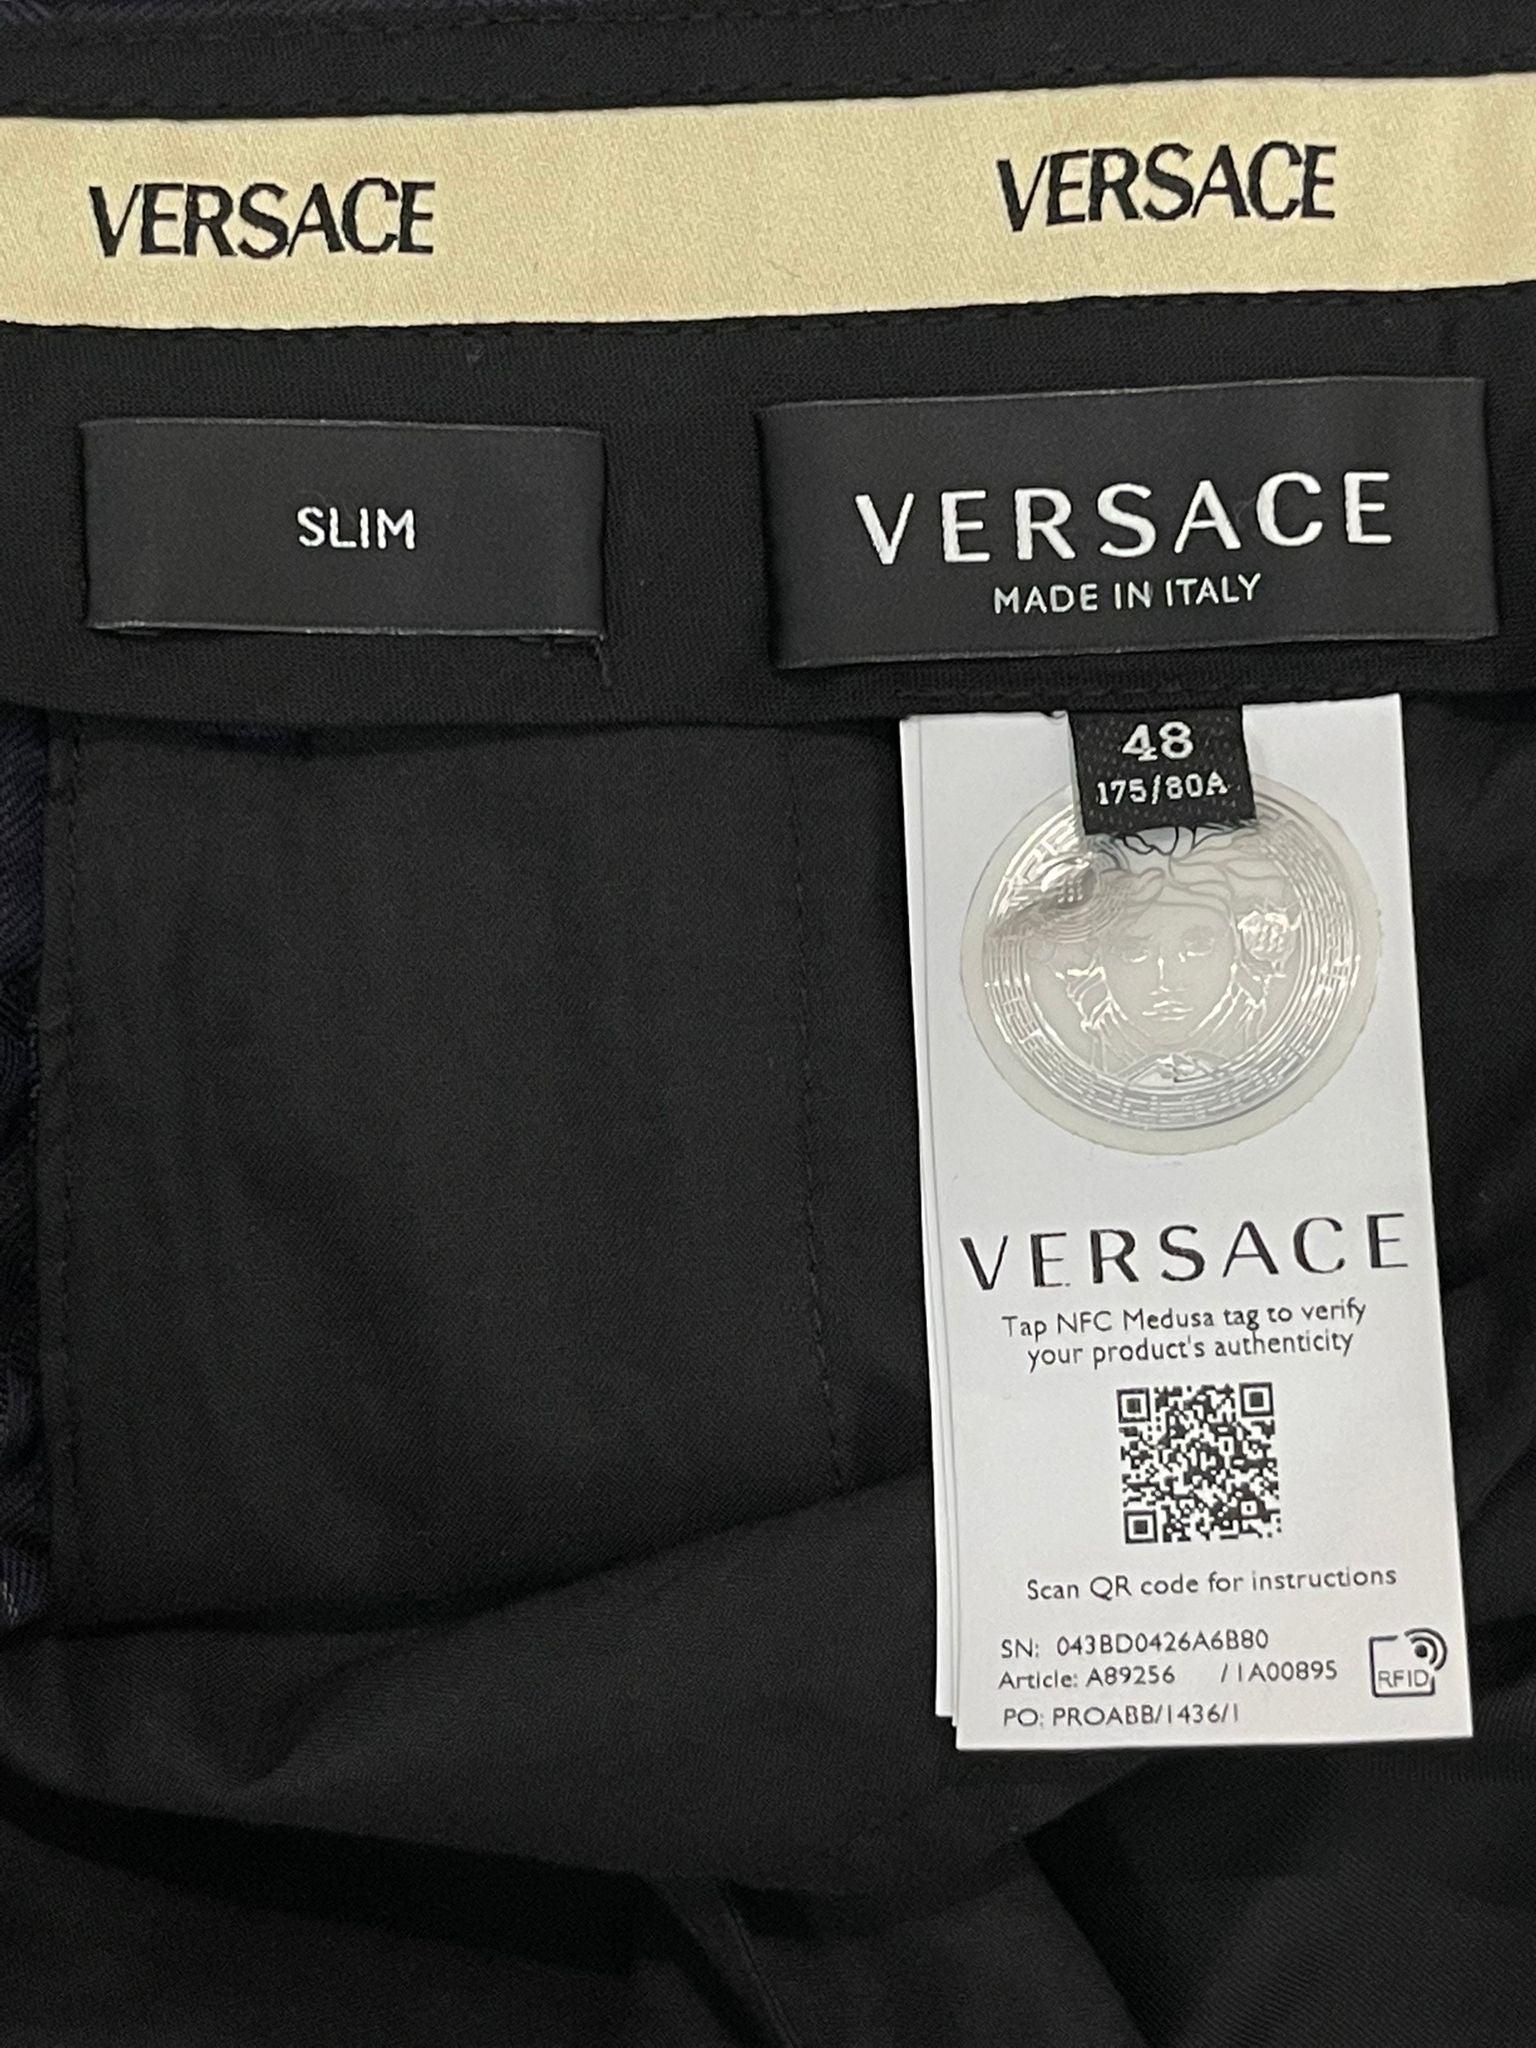 Brand New - Versace Suit - Jacket & Matching Trousers 1